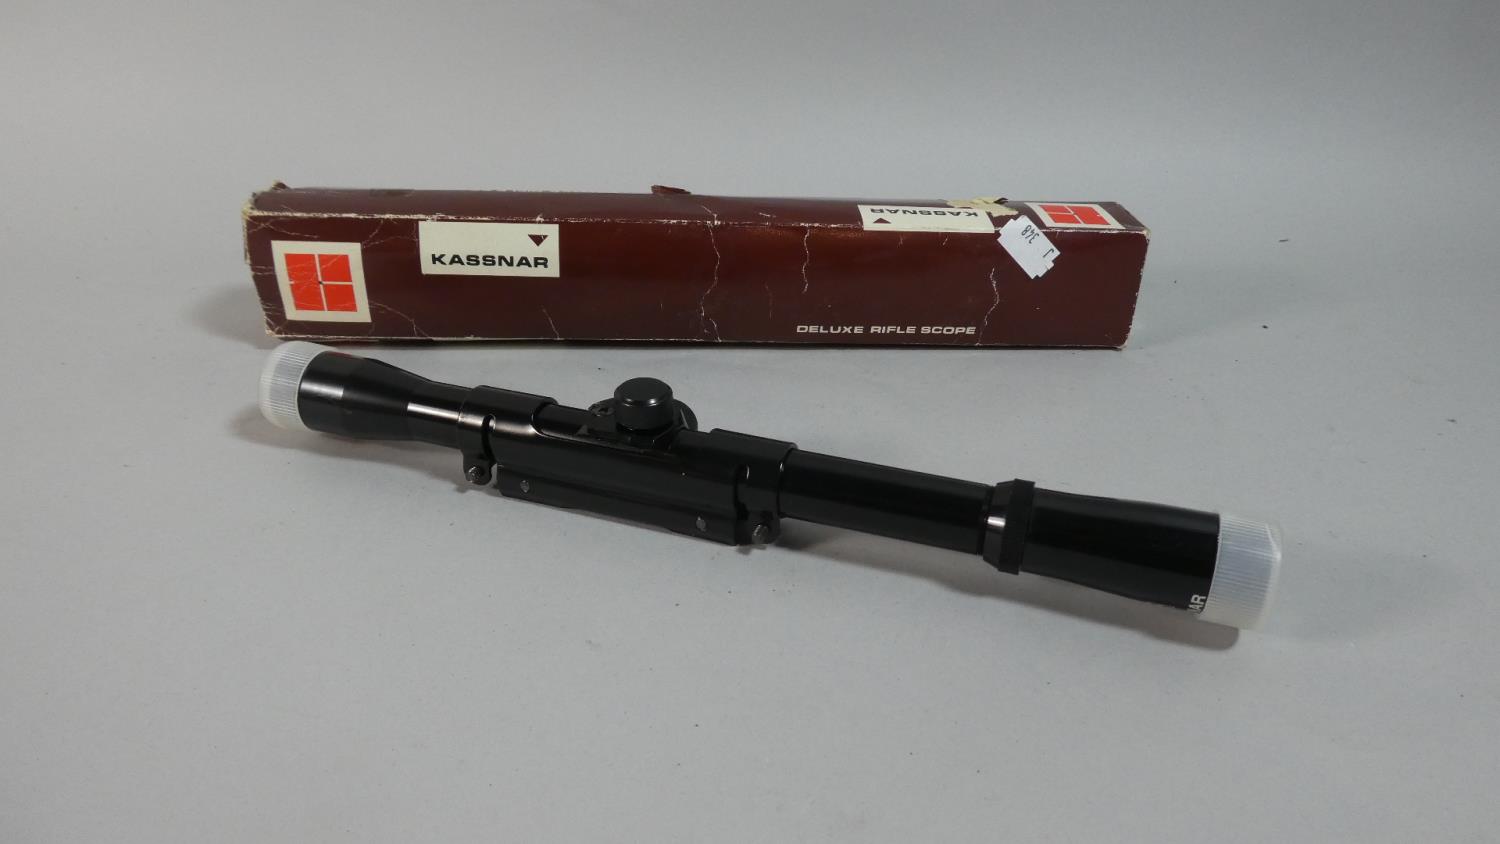 A Deluxe Air Rife Scope by Kassnar